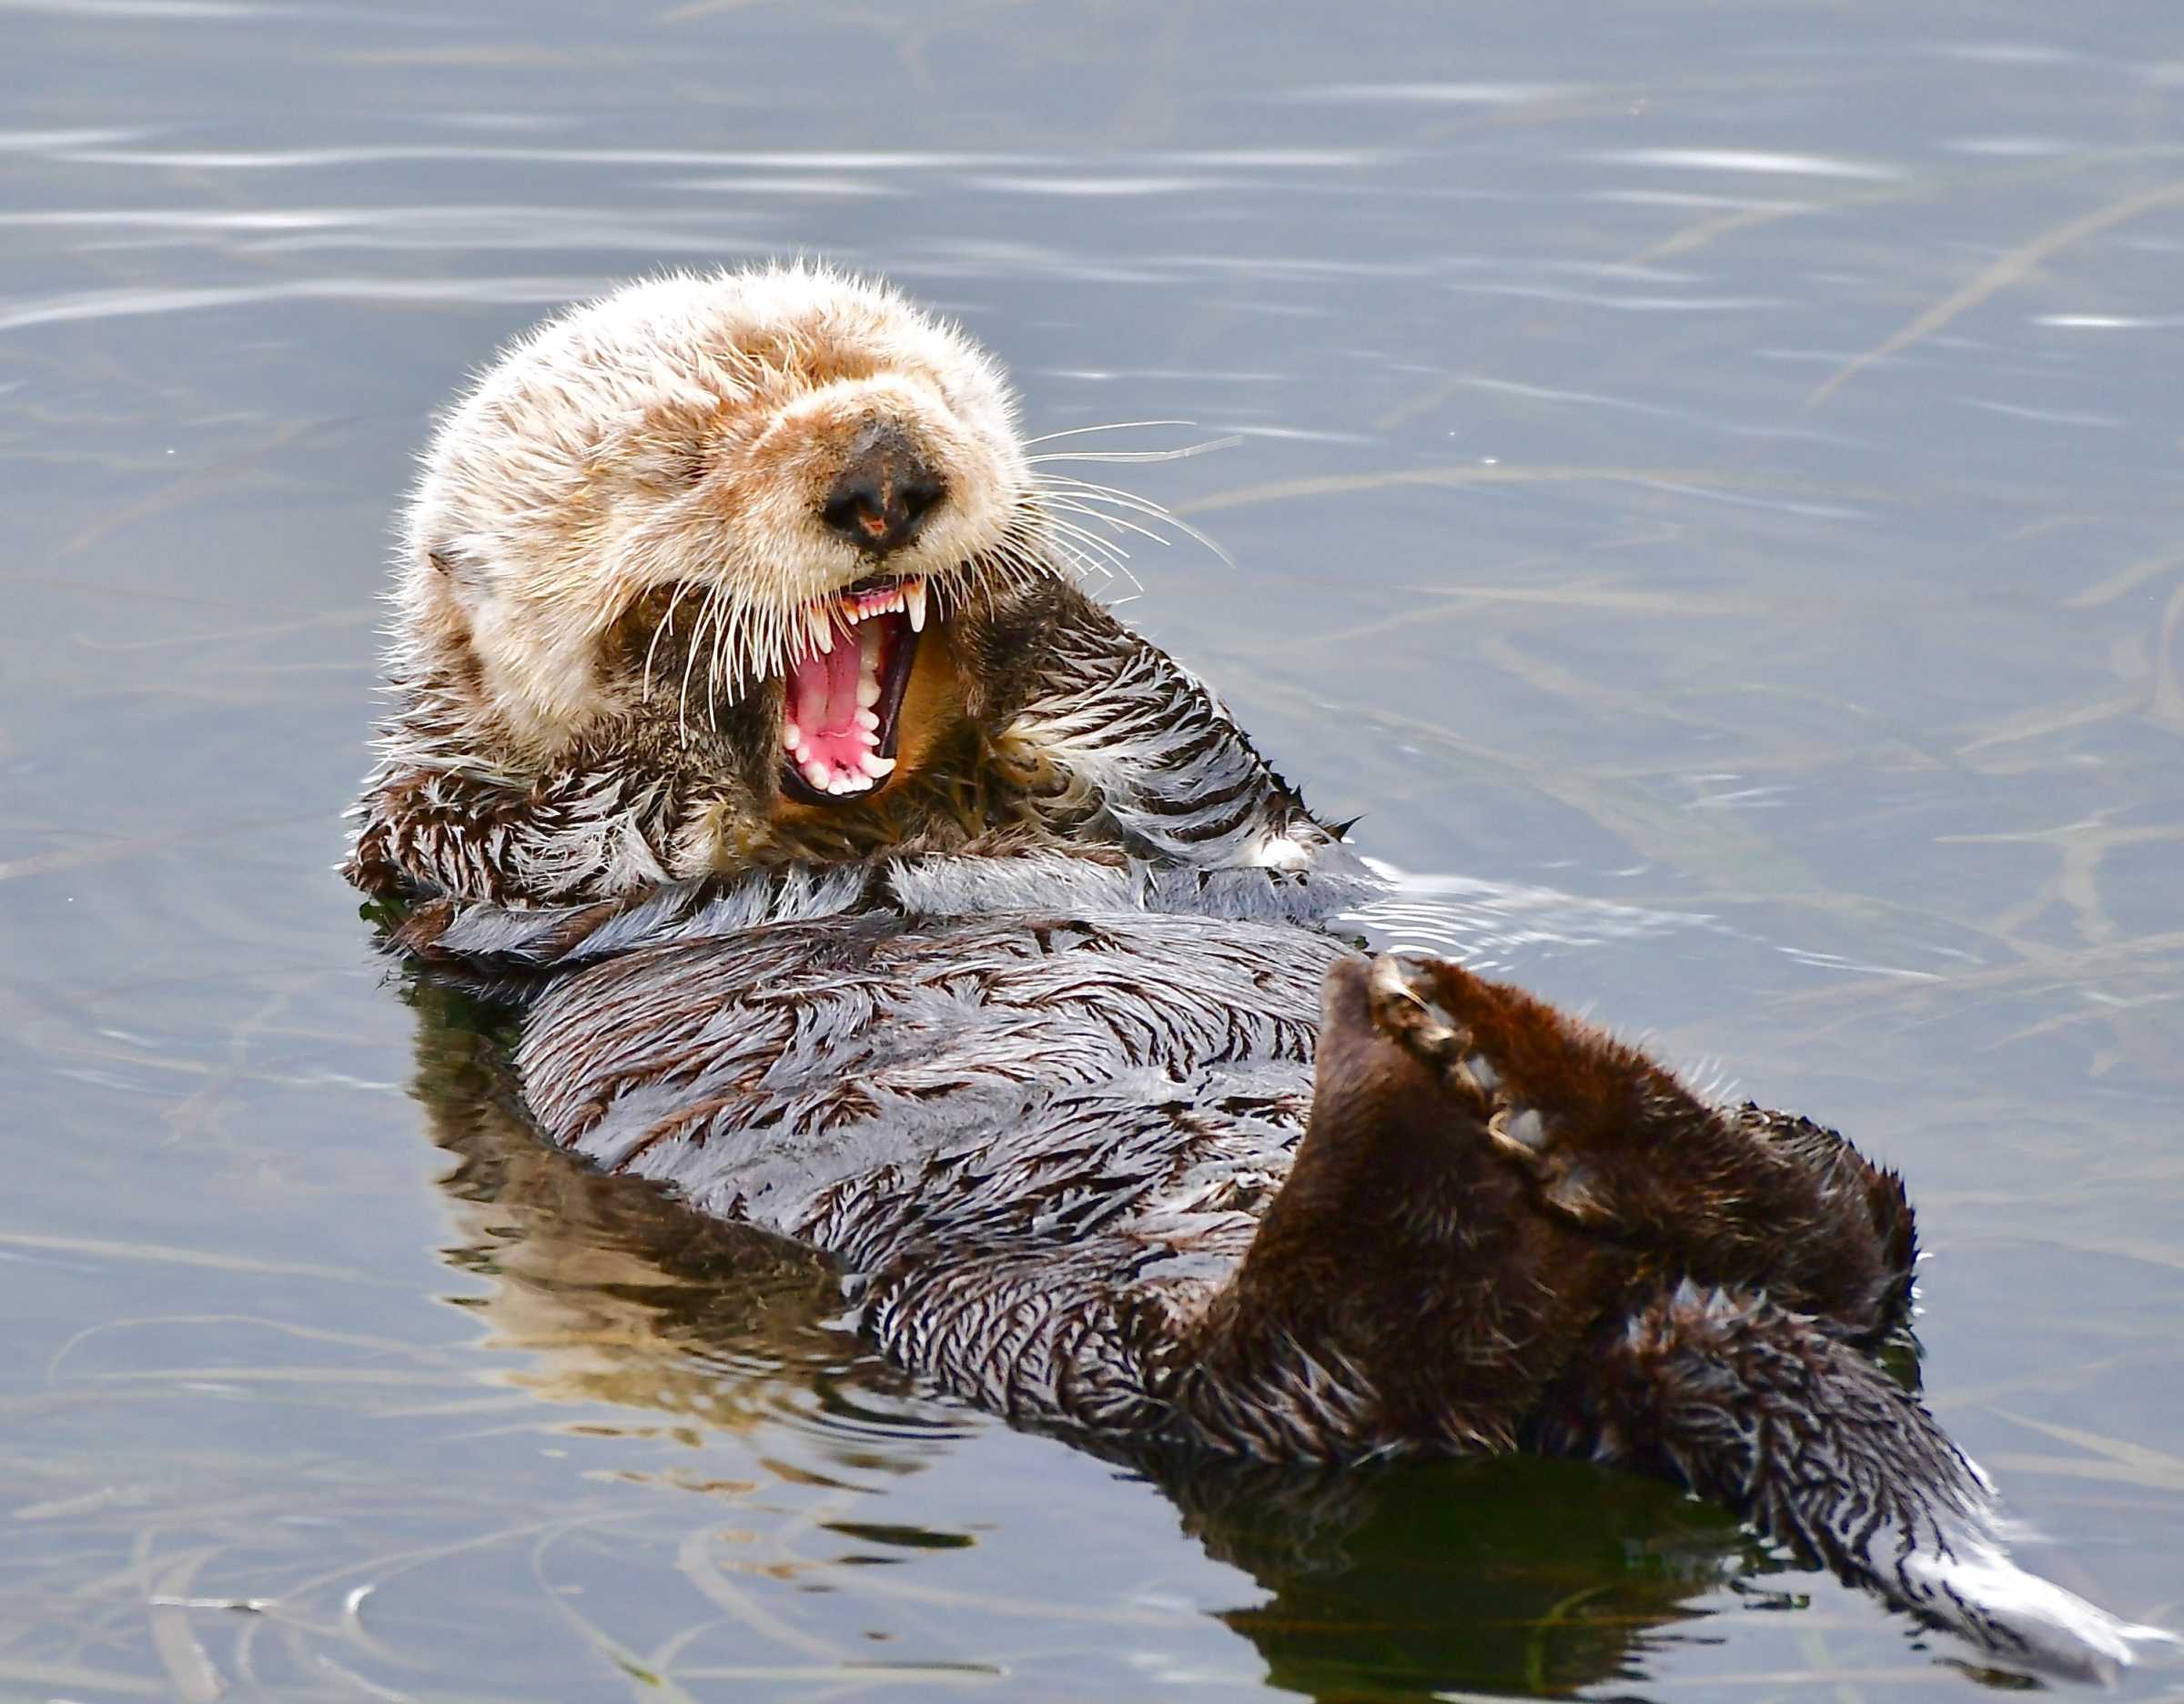 The Marine Mammal Center | Put Your Sea Otter Knowledge to the Test